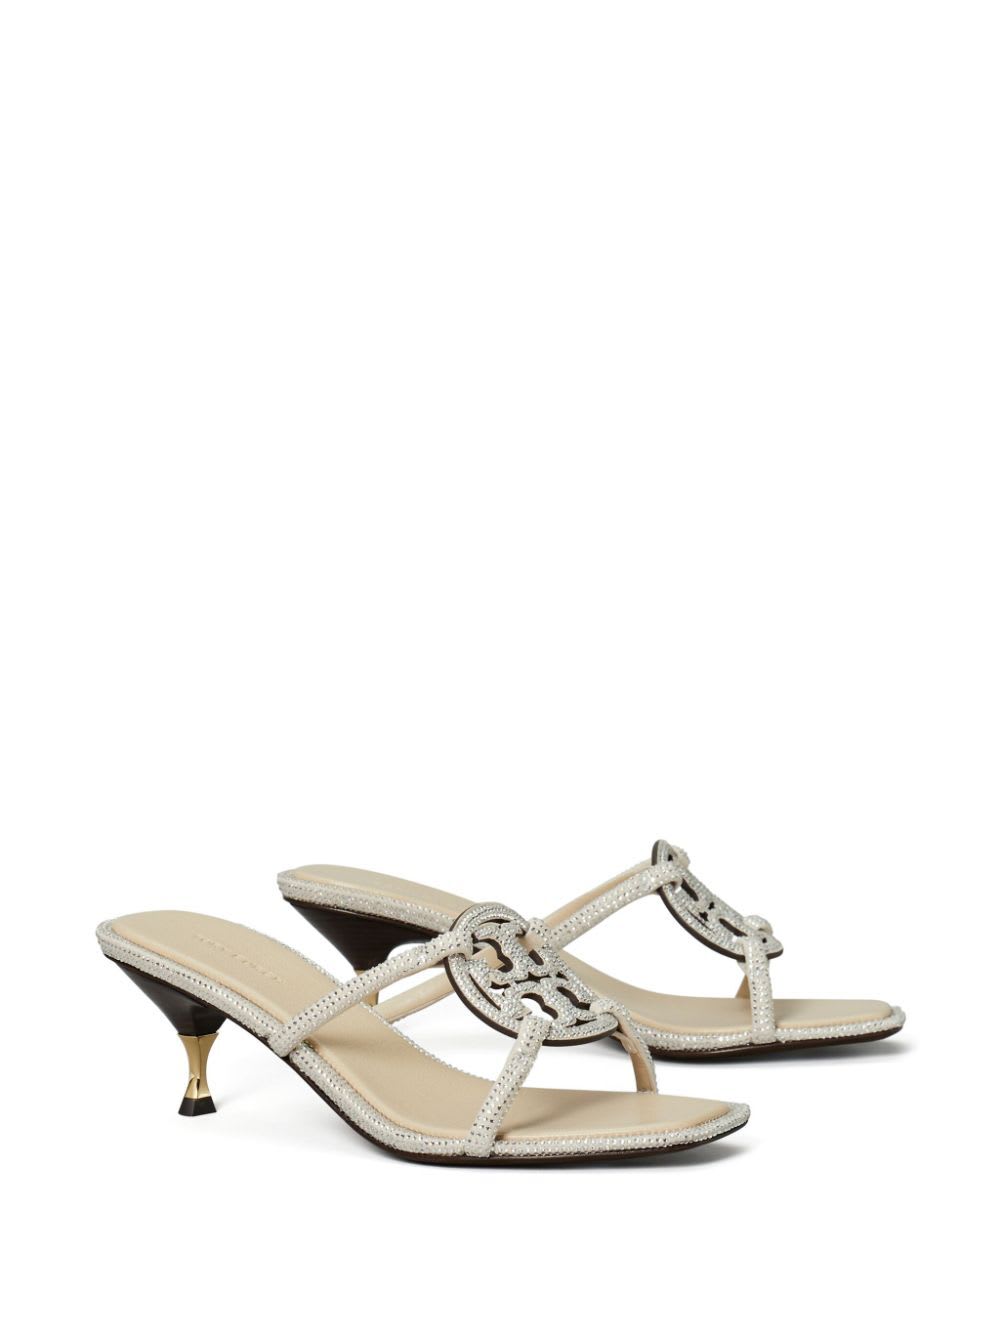 Shop Tory Burch Pave Geo Bombe Miller Low Heel Sandal In Stone Gray